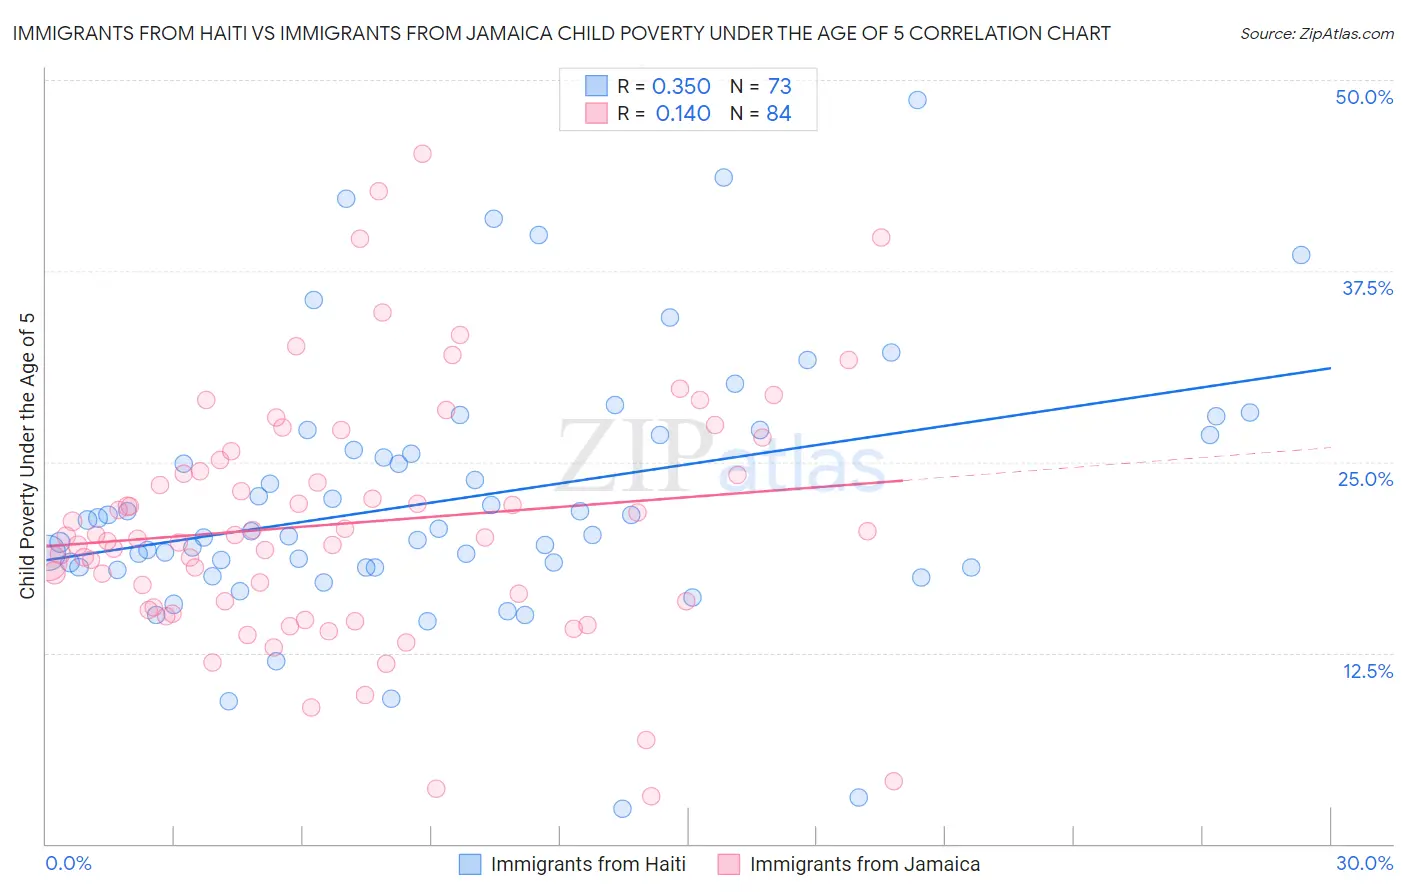 Immigrants from Haiti vs Immigrants from Jamaica Child Poverty Under the Age of 5